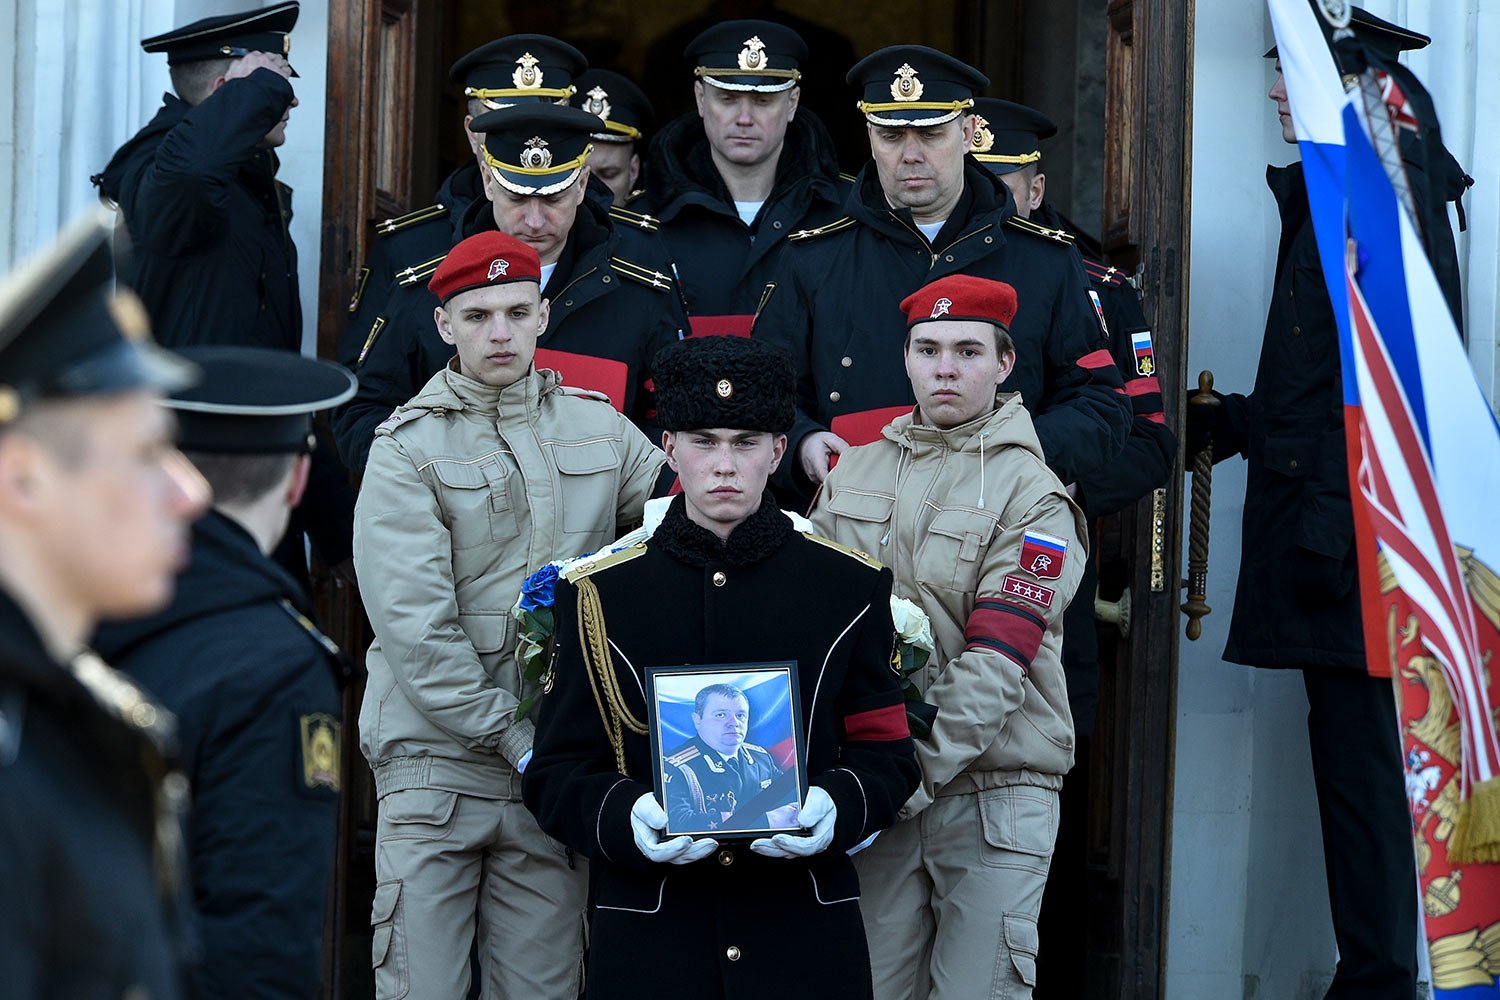  A serviceman carries the photo of Capt. Andrei Paliy, a deputy commander of Russia's Black Sea Fleet, during a farewell ceremony in Sevastopol, Crimea, Wednesday, March 23, 2022. Paliy was killed in action during fighting with Ukrainian forces in th